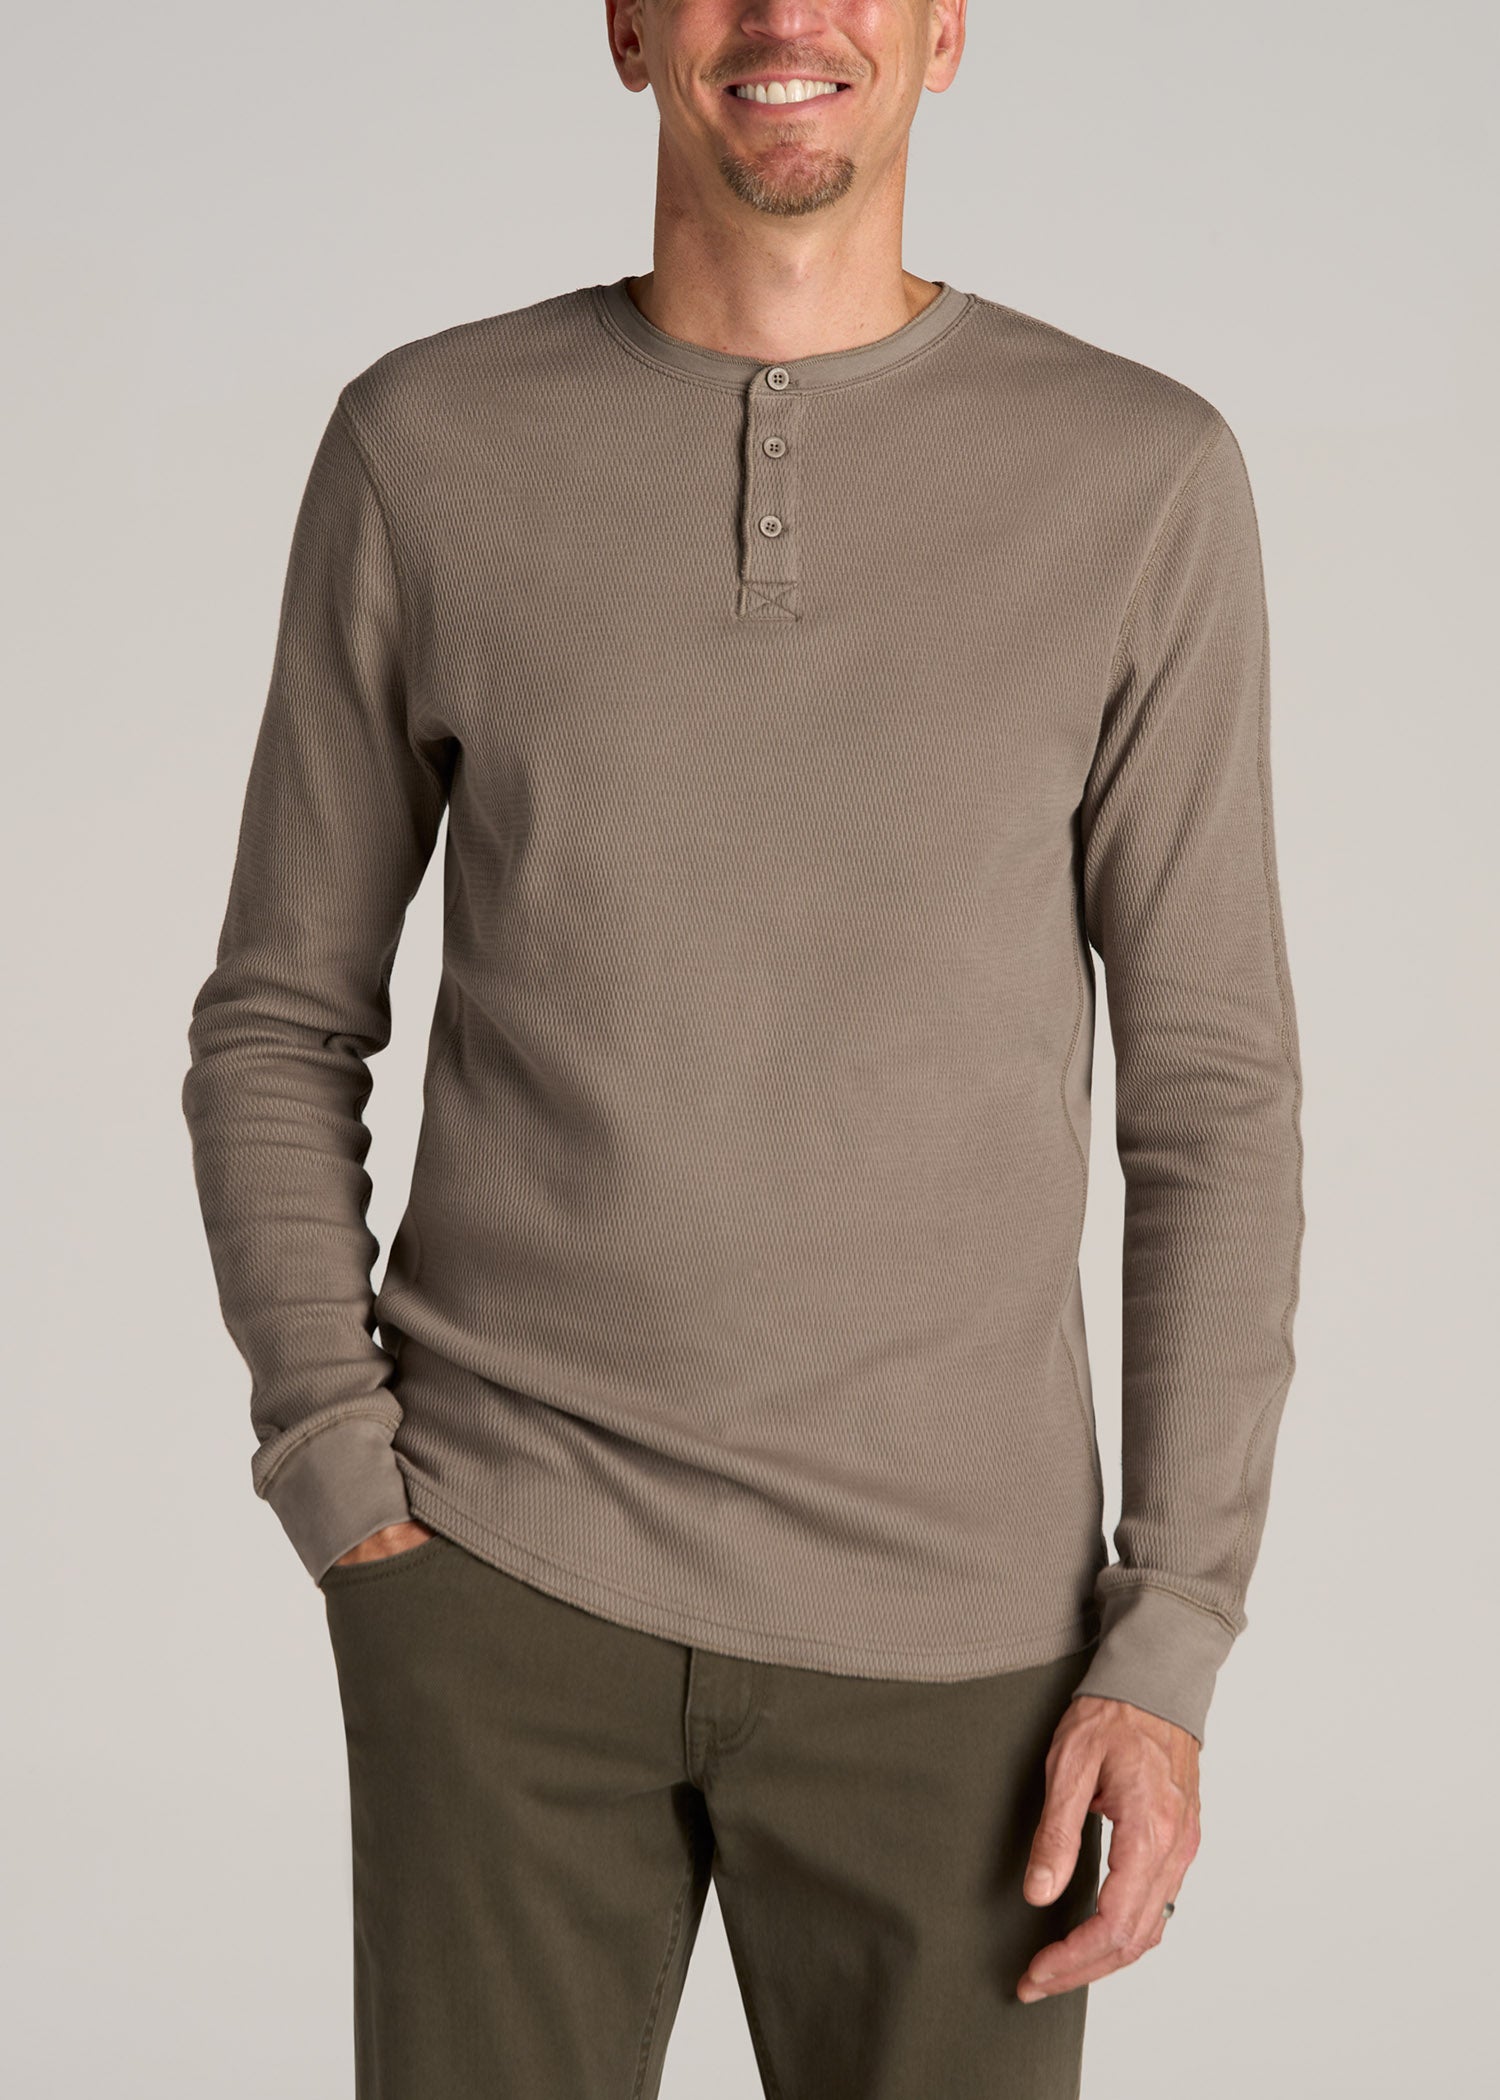 Double Honeycomb Thermal Long-Sleeve Henley Shirt for Tall Men